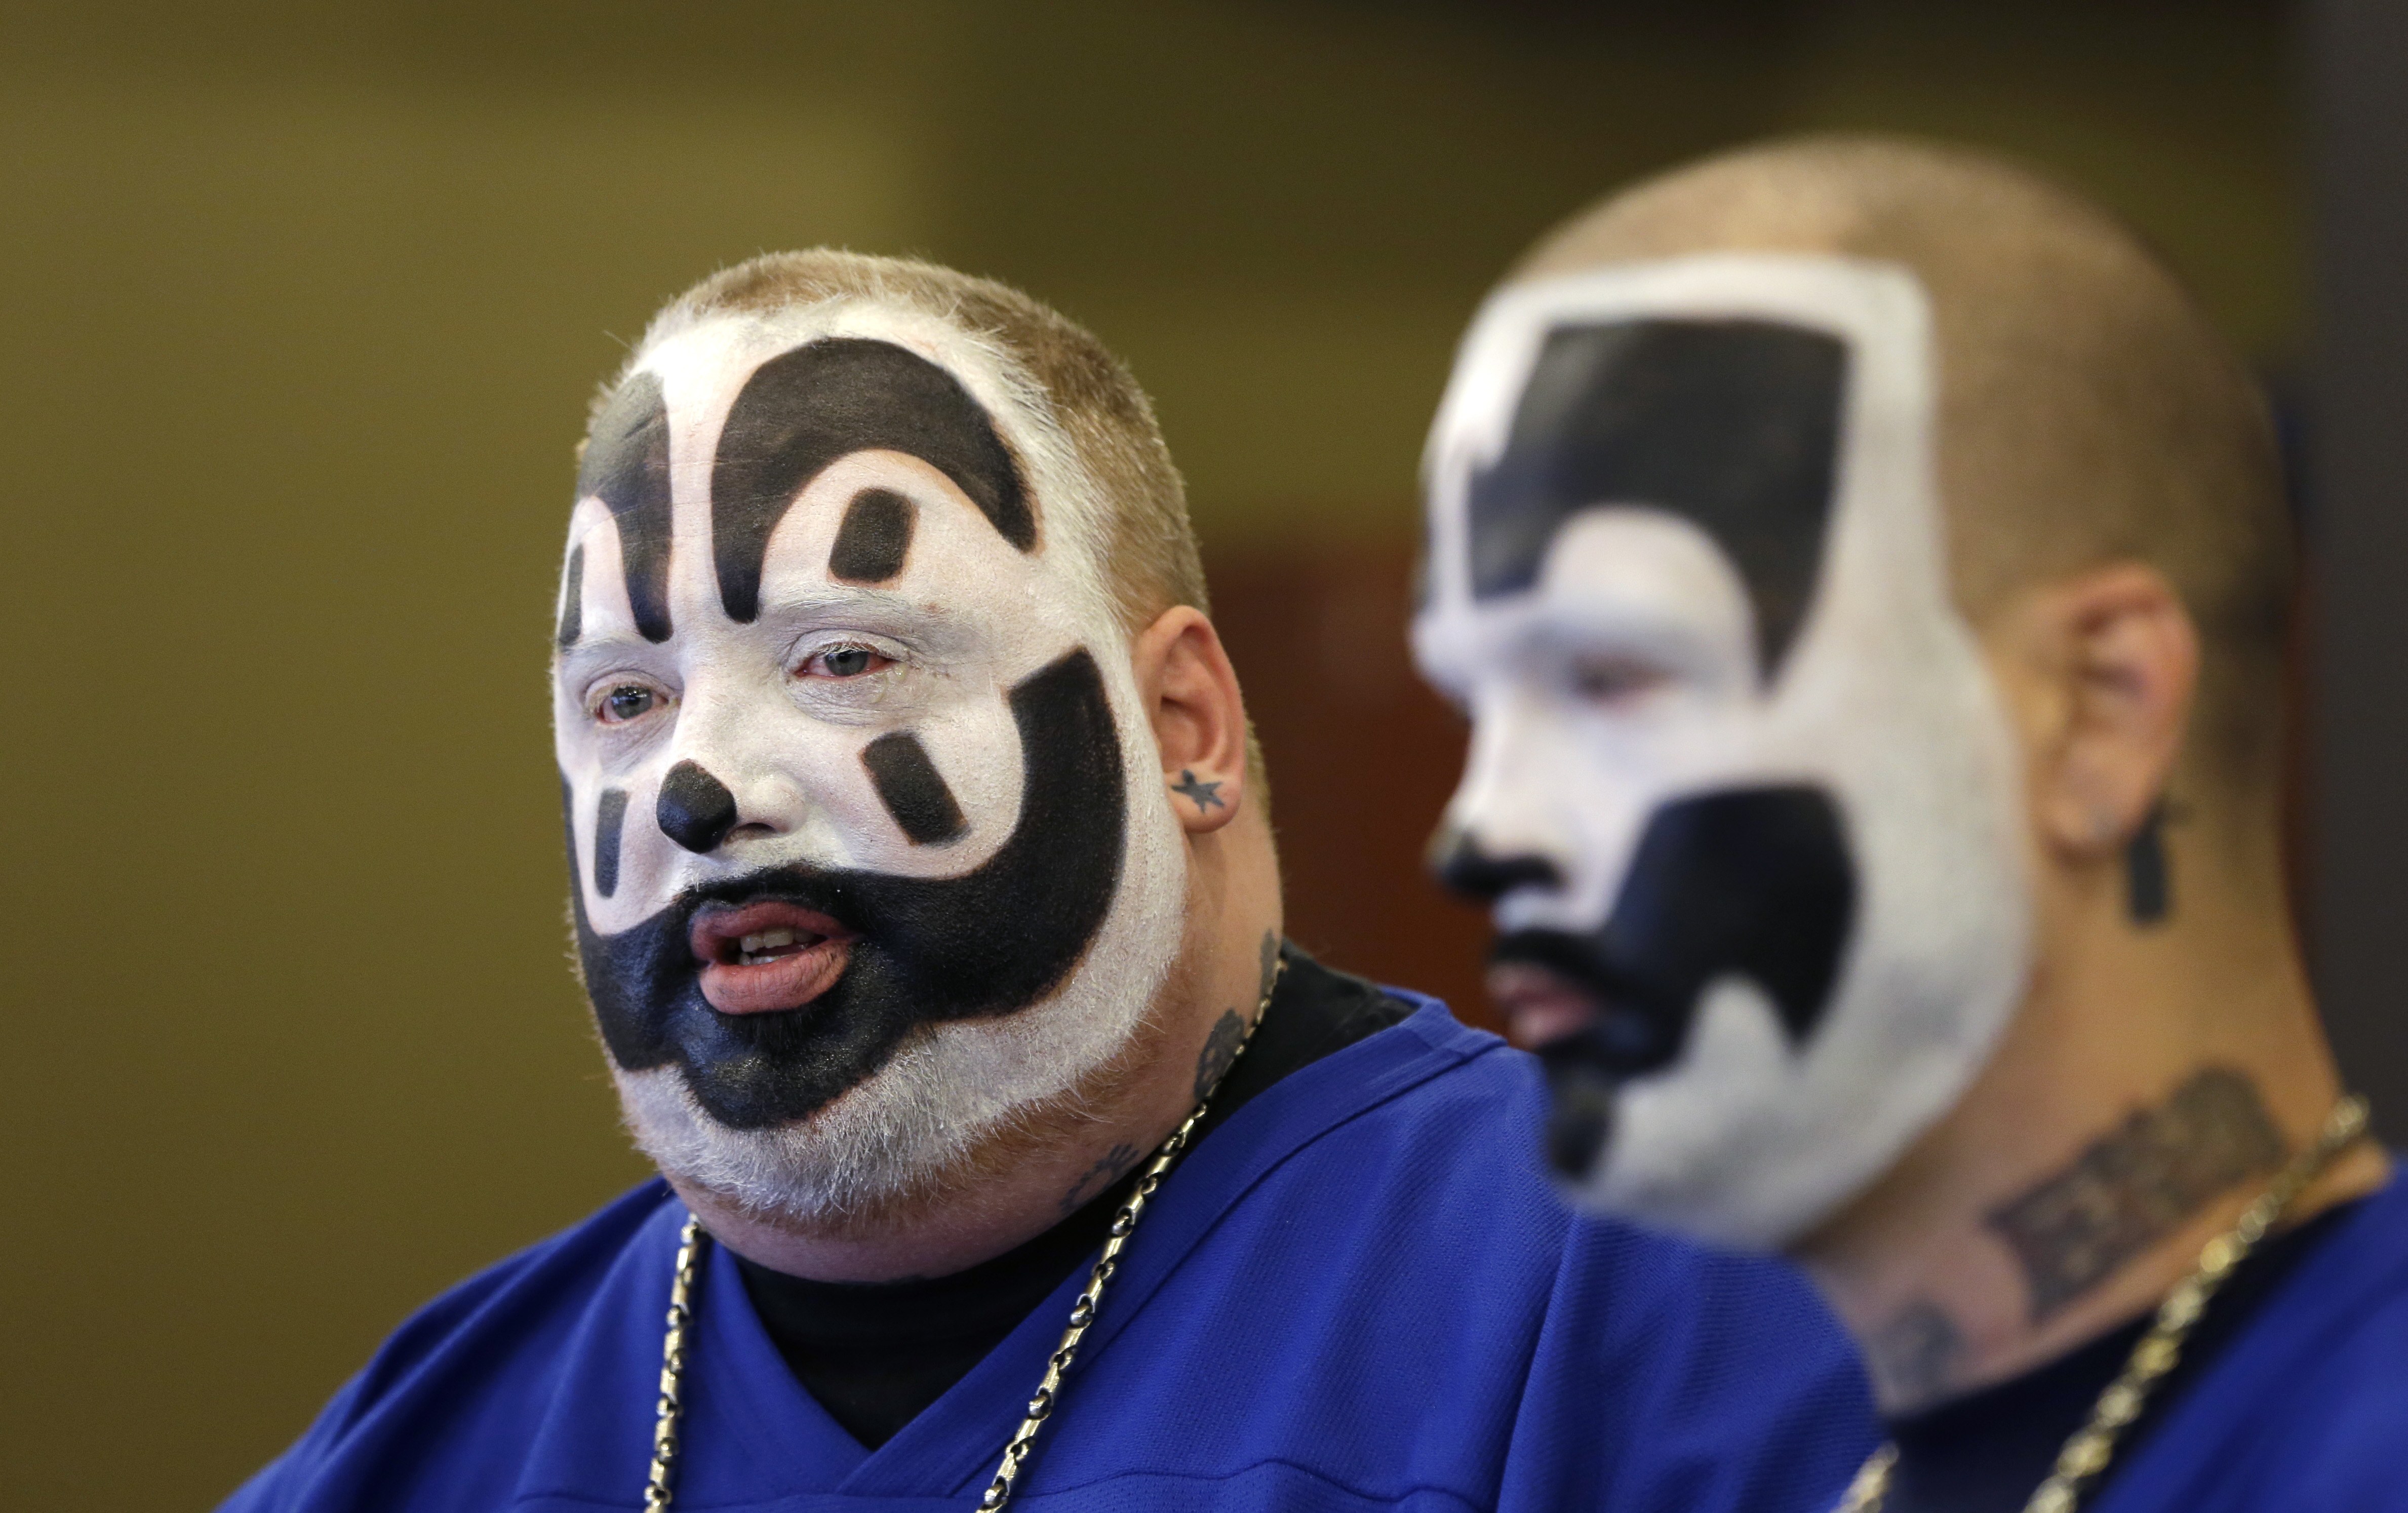 Insane Clown Posse, metal band, sues feds over gang label